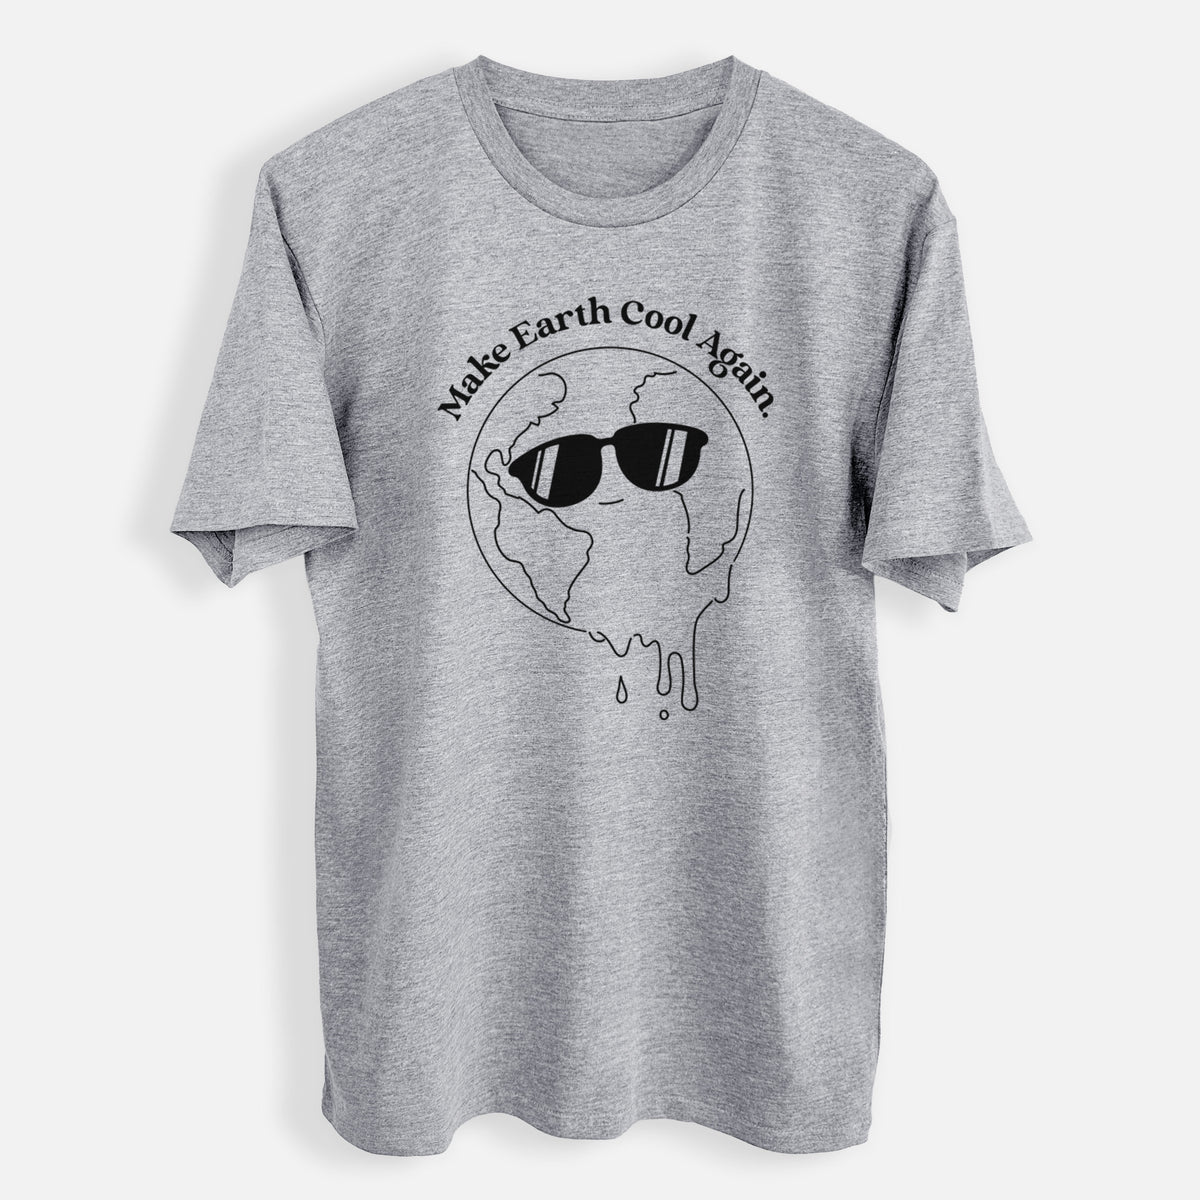 Make Earth Cool Again - Melted Planet - Mens Everyday Staple Tee